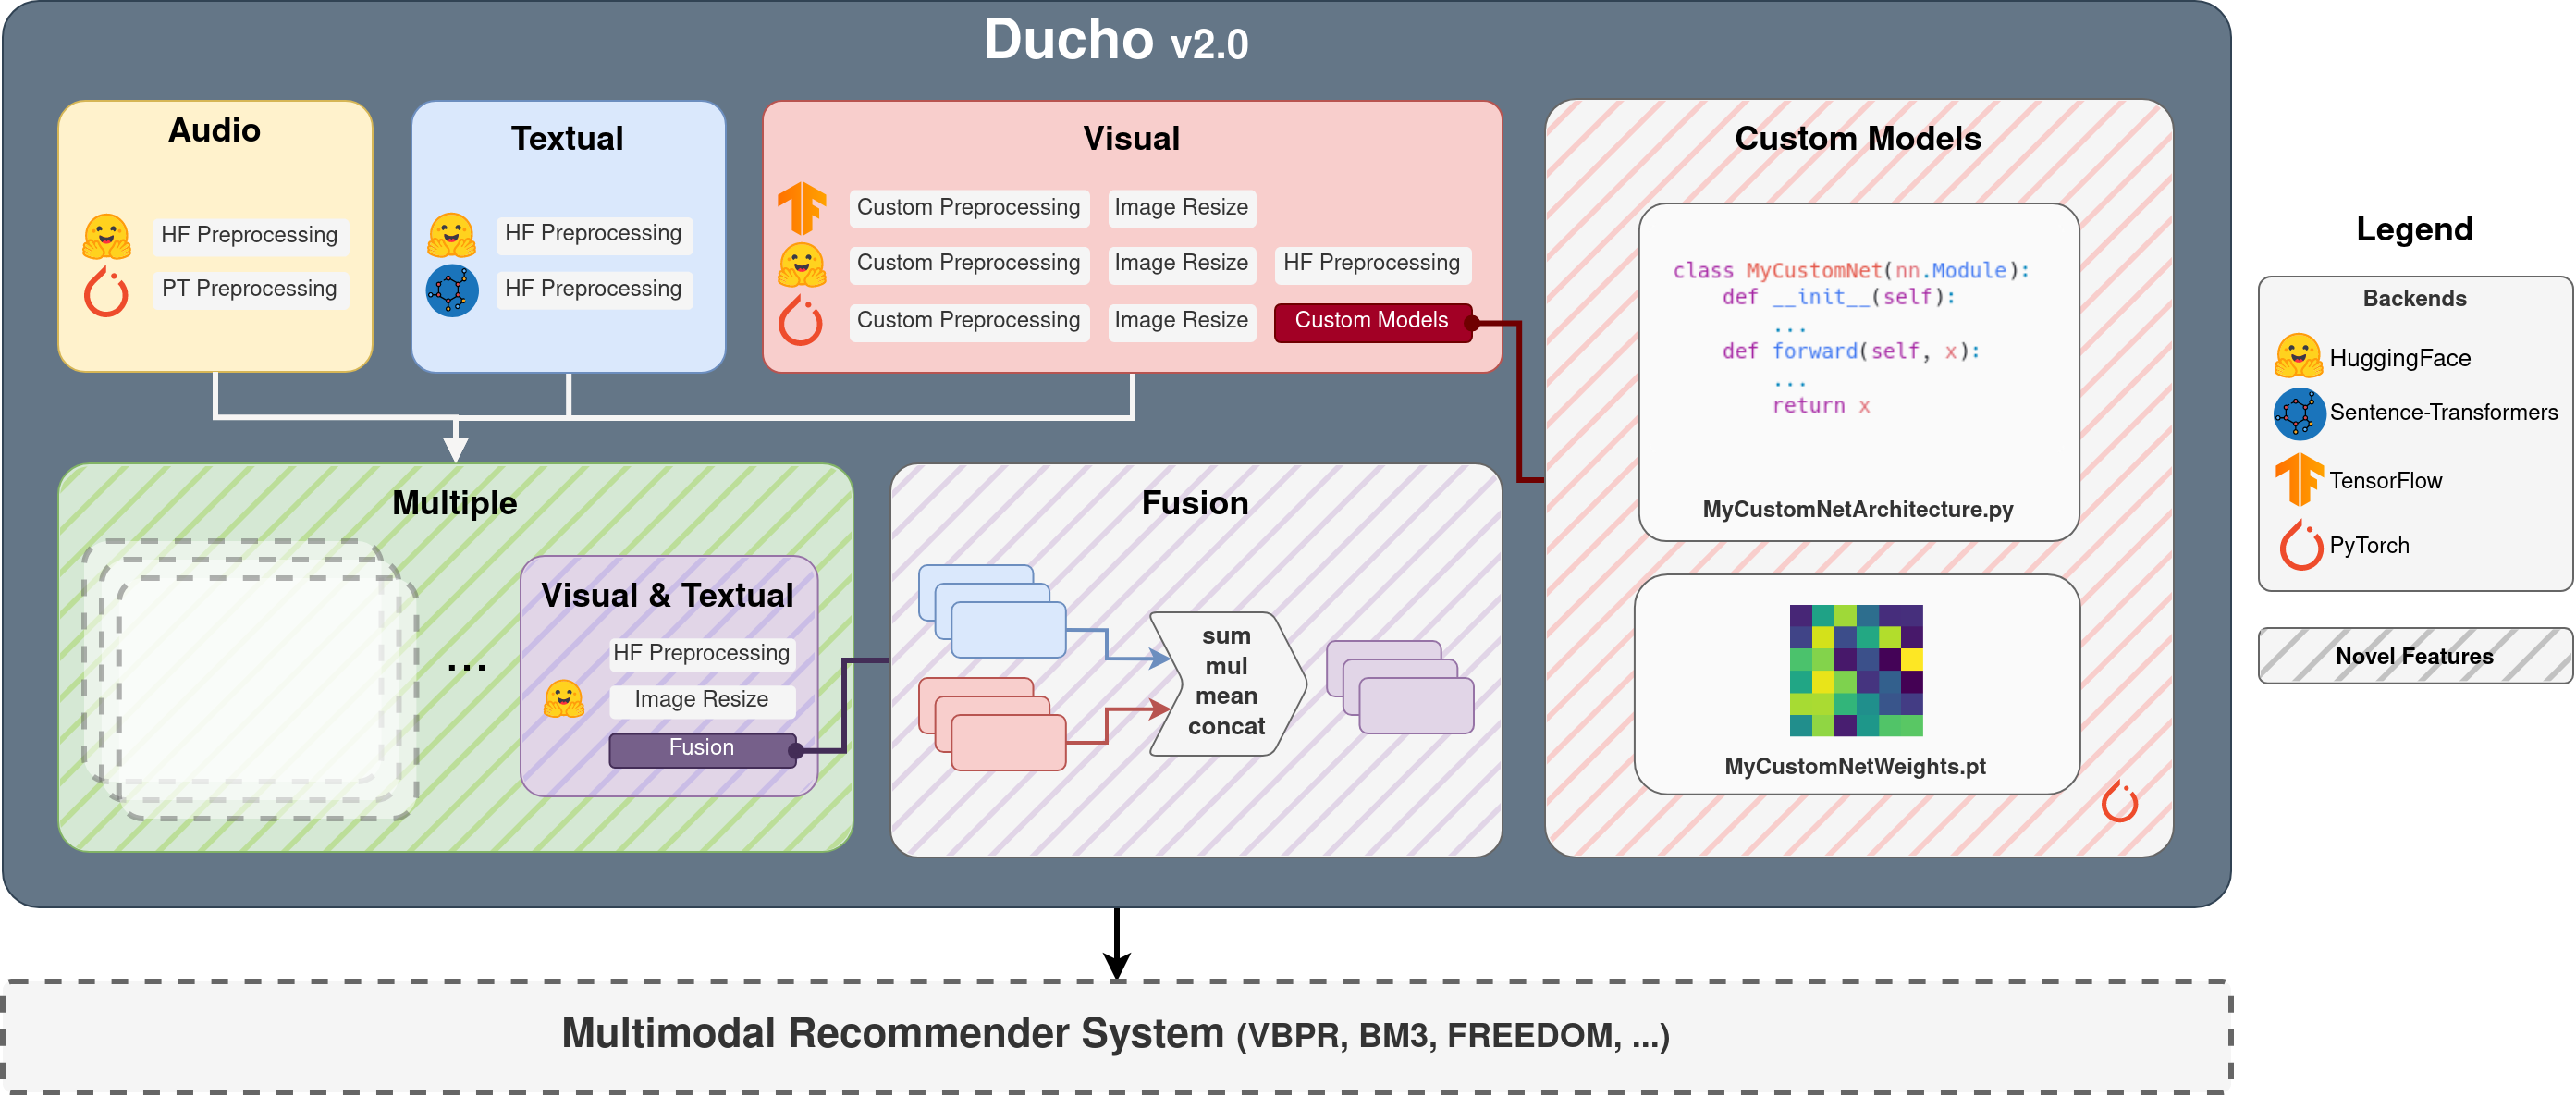 Ducho 2.0: Towards a More Up-to-Date Feature Extraction and Processing Framework for Multimodal Recommendation